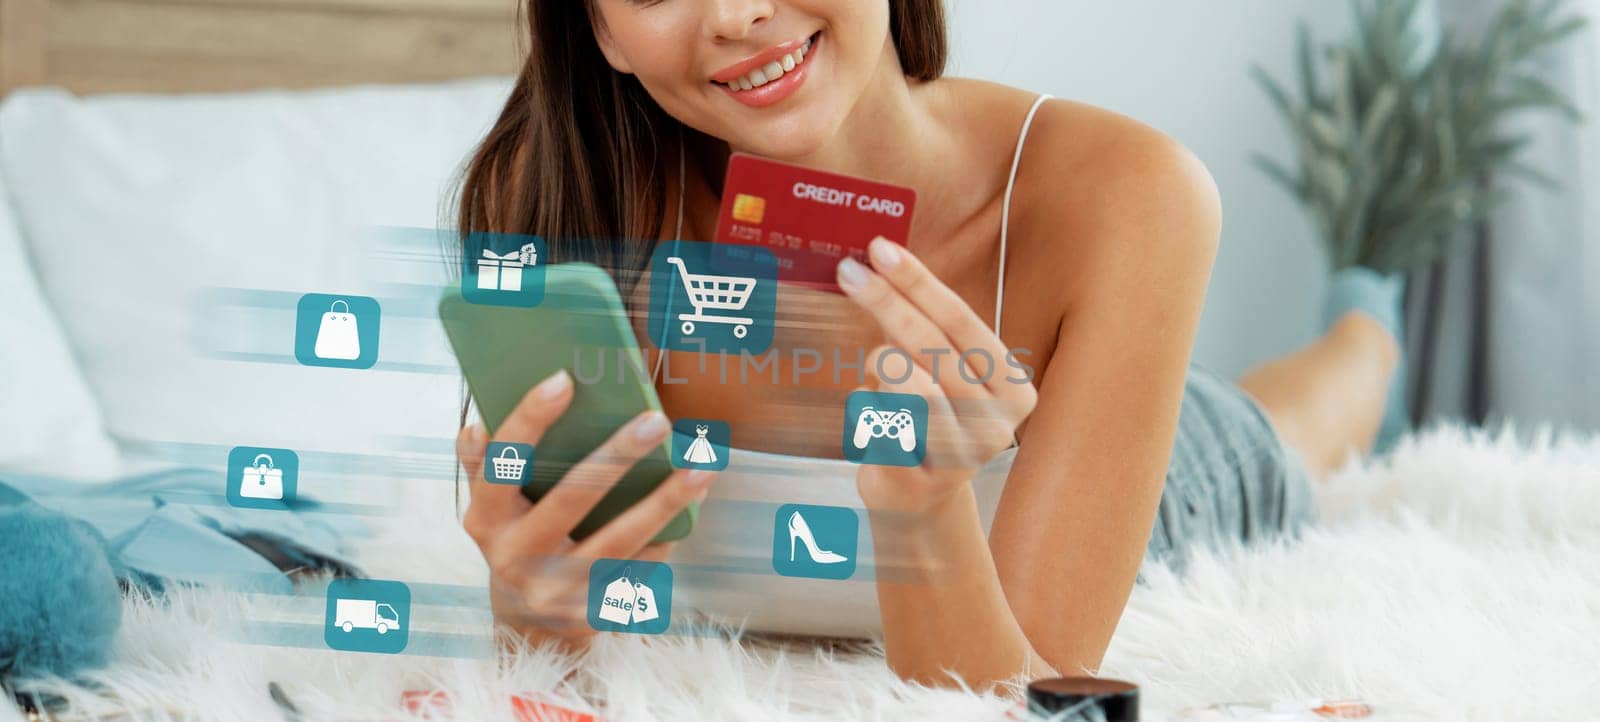 Elegant customer wearing white tank top holding credit card typing phone choosing online platform. Smart consumer opening e-commerce application use cashless technology shopping inventory. Cybercash.